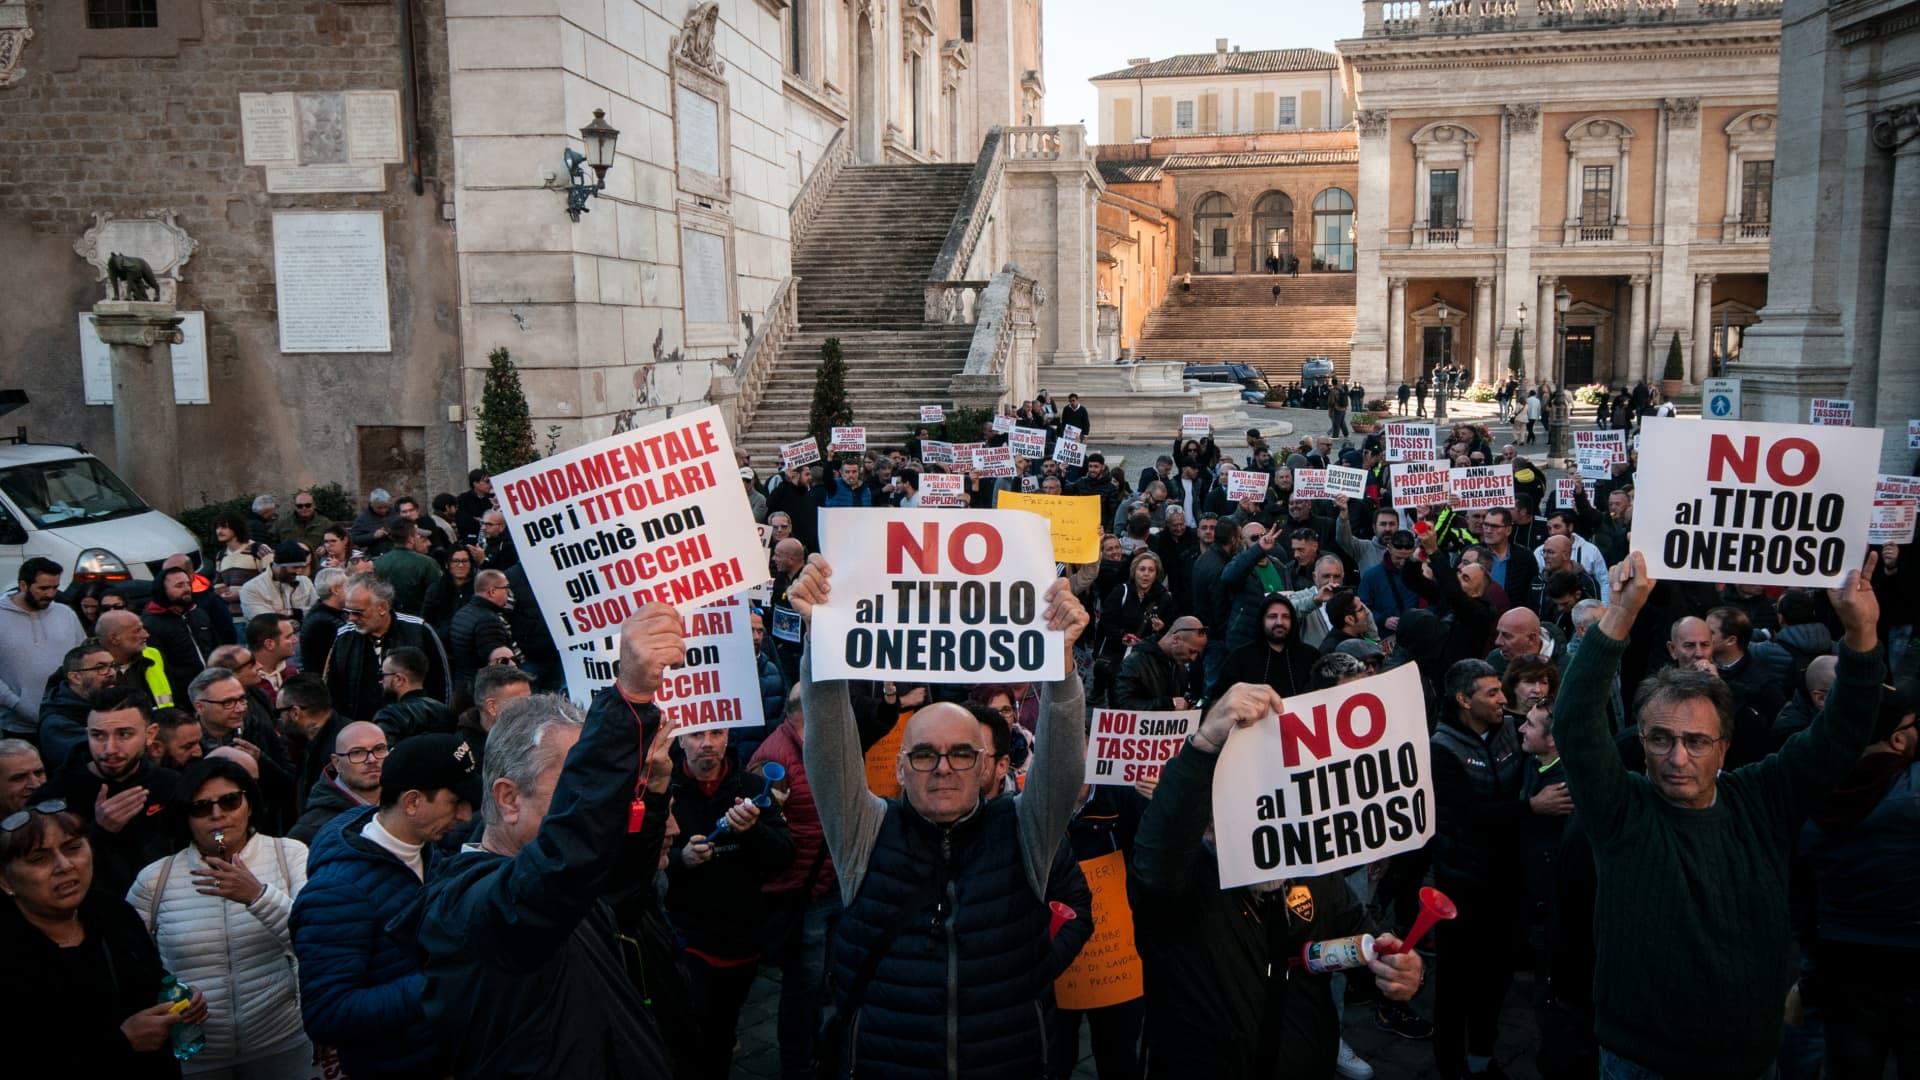 Taxi drivers holding a demonstration in Piazza del Campidoglio in response to the decision made by the Mayor of Rome, Roberto Gualtieri, and the Councilor for Mobility, Eugenio Patane, to issue new taxi licenses in exchange for payment. The event took place on Nov. 9, 2023, in Rome, Italy.